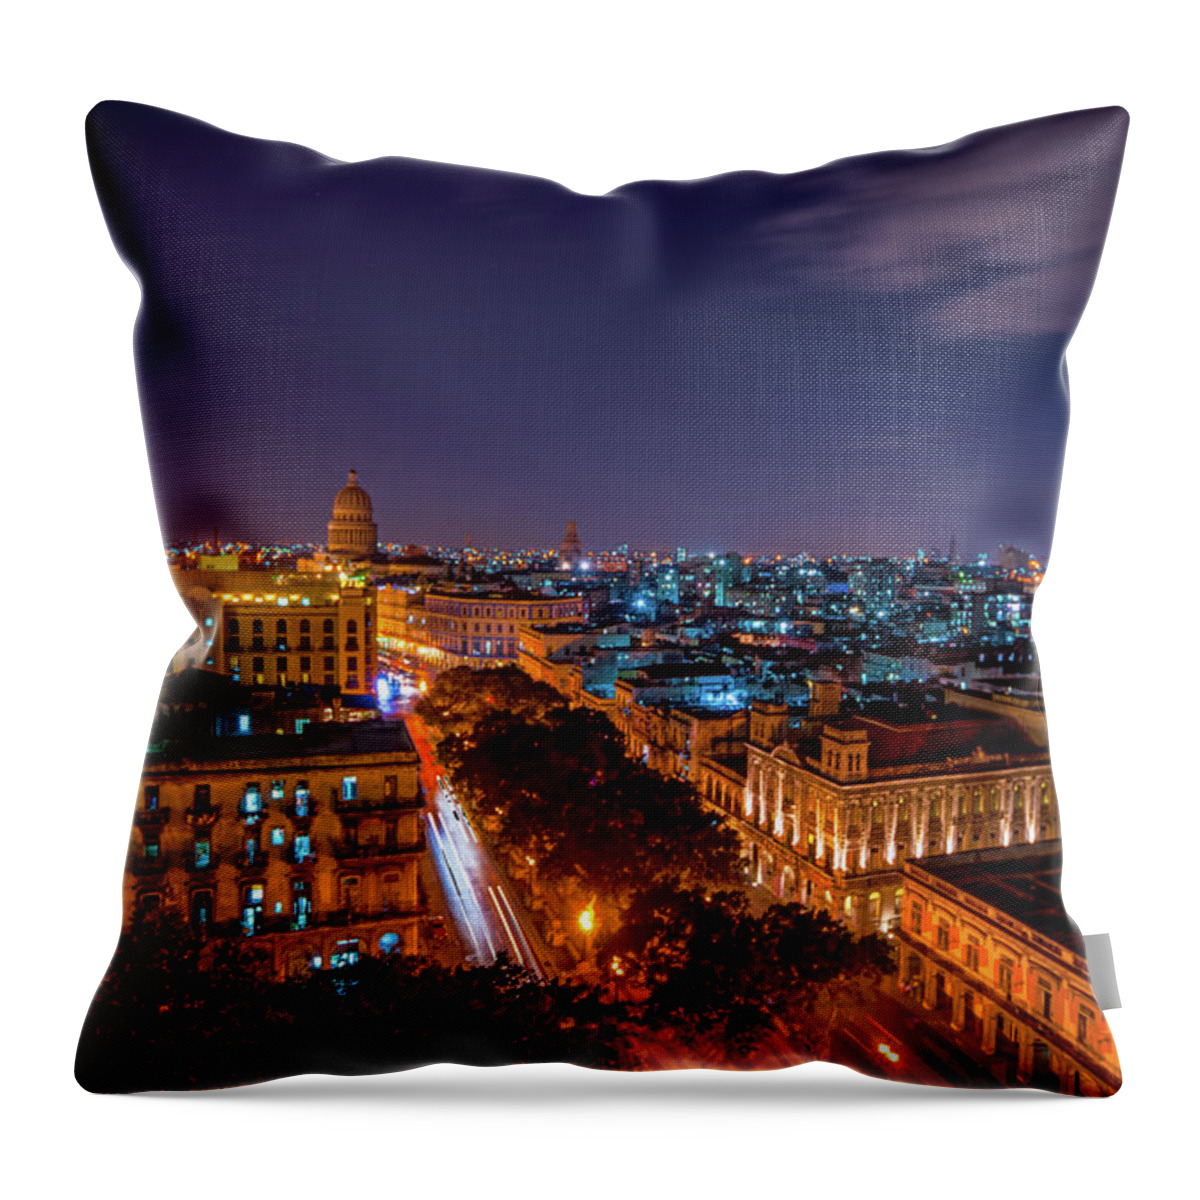 Tranquility Throw Pillow featuring the photograph Habana Lights View Of Habana At Night by Images By Toronto Photographer Robert Greatrix